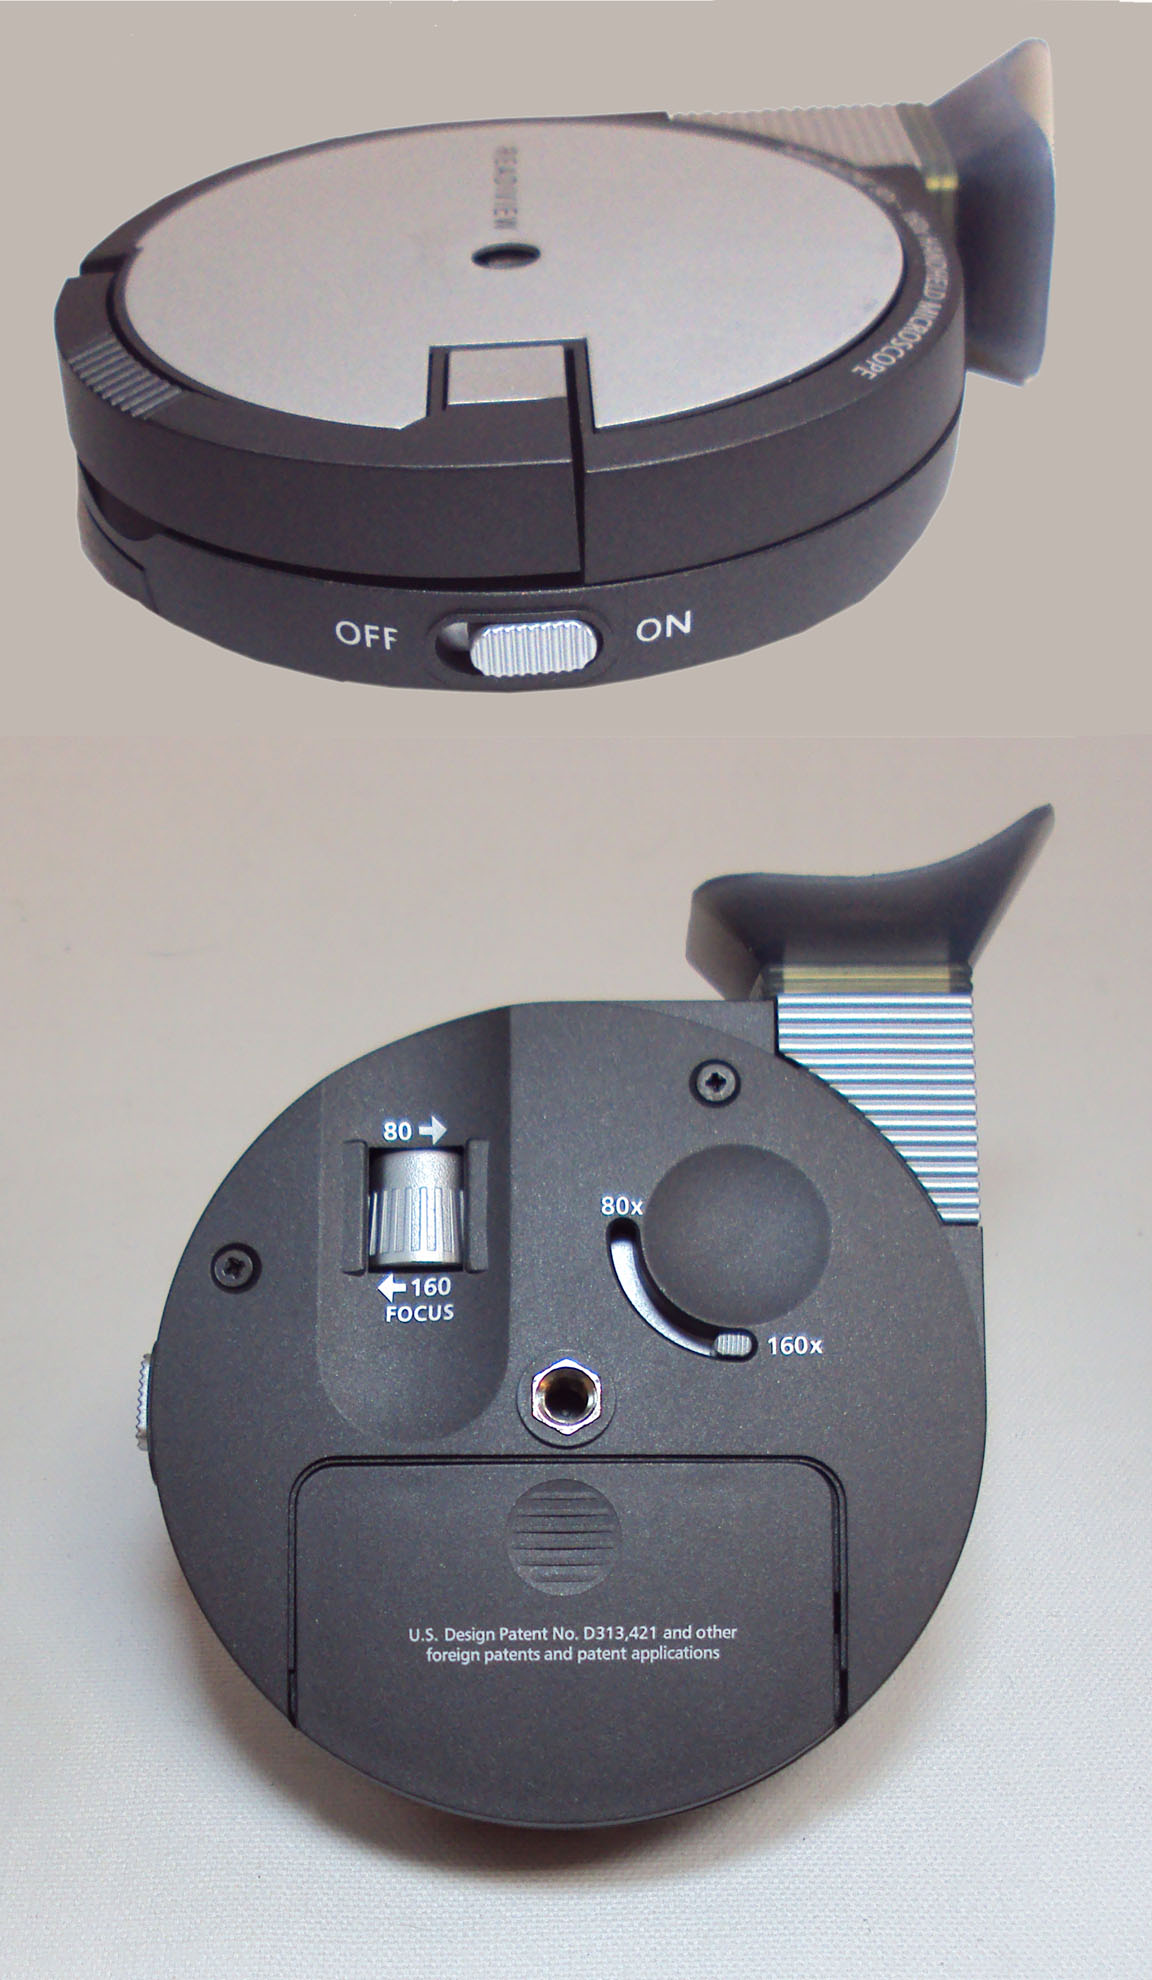 Readiview Microscope top and bottom